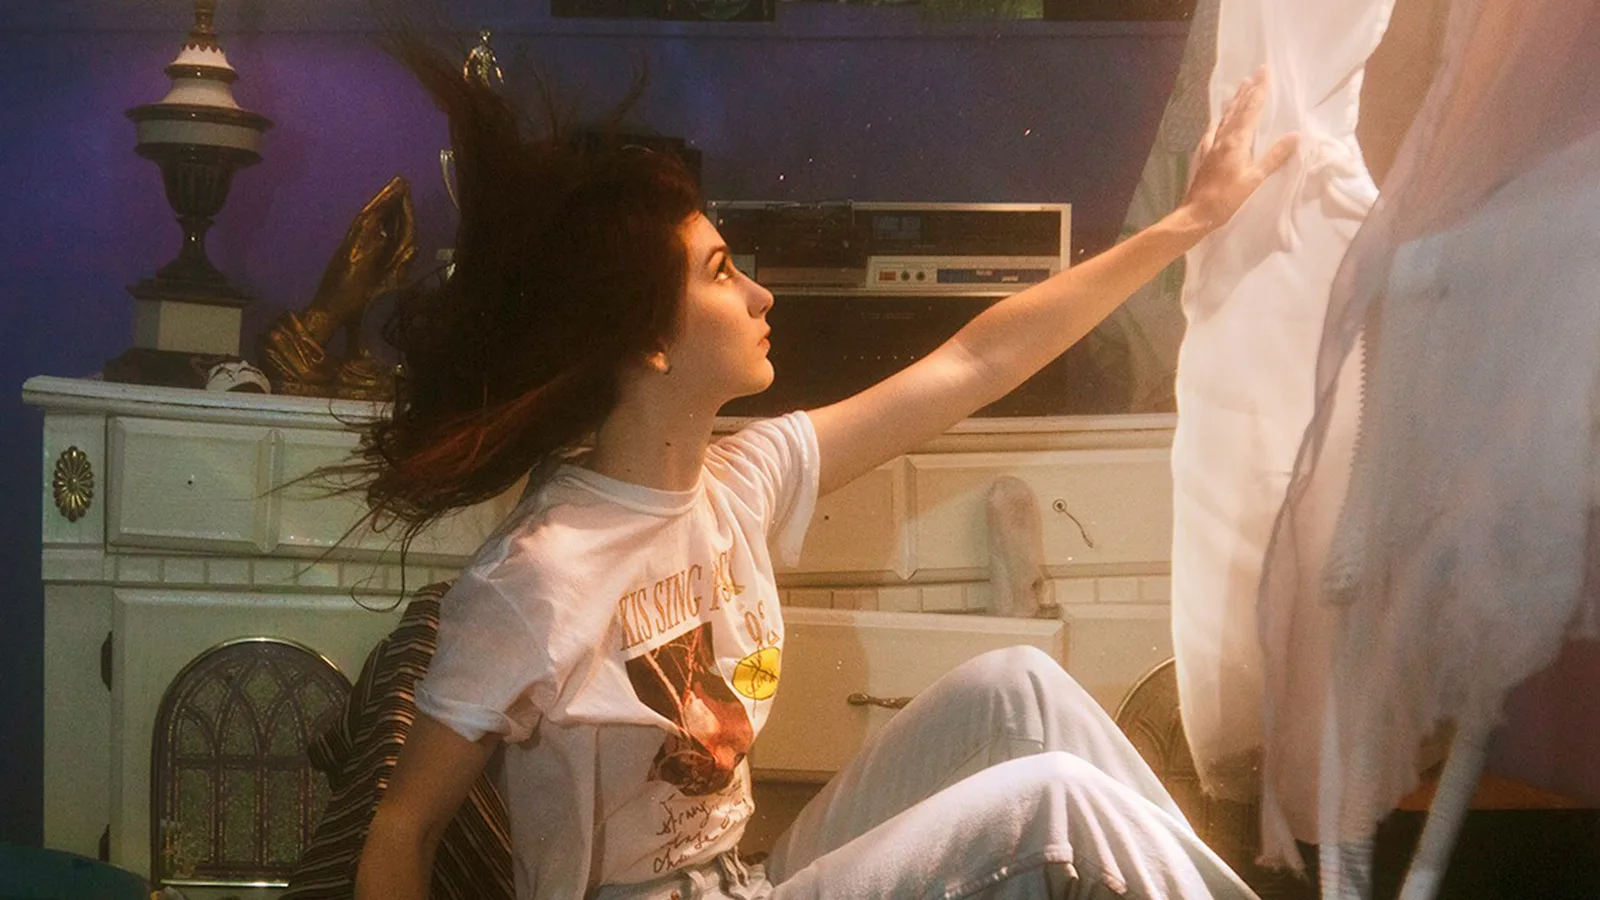 The artist Weyes Blood in an underwater photoshoot reaching towards a bright light off to the right.